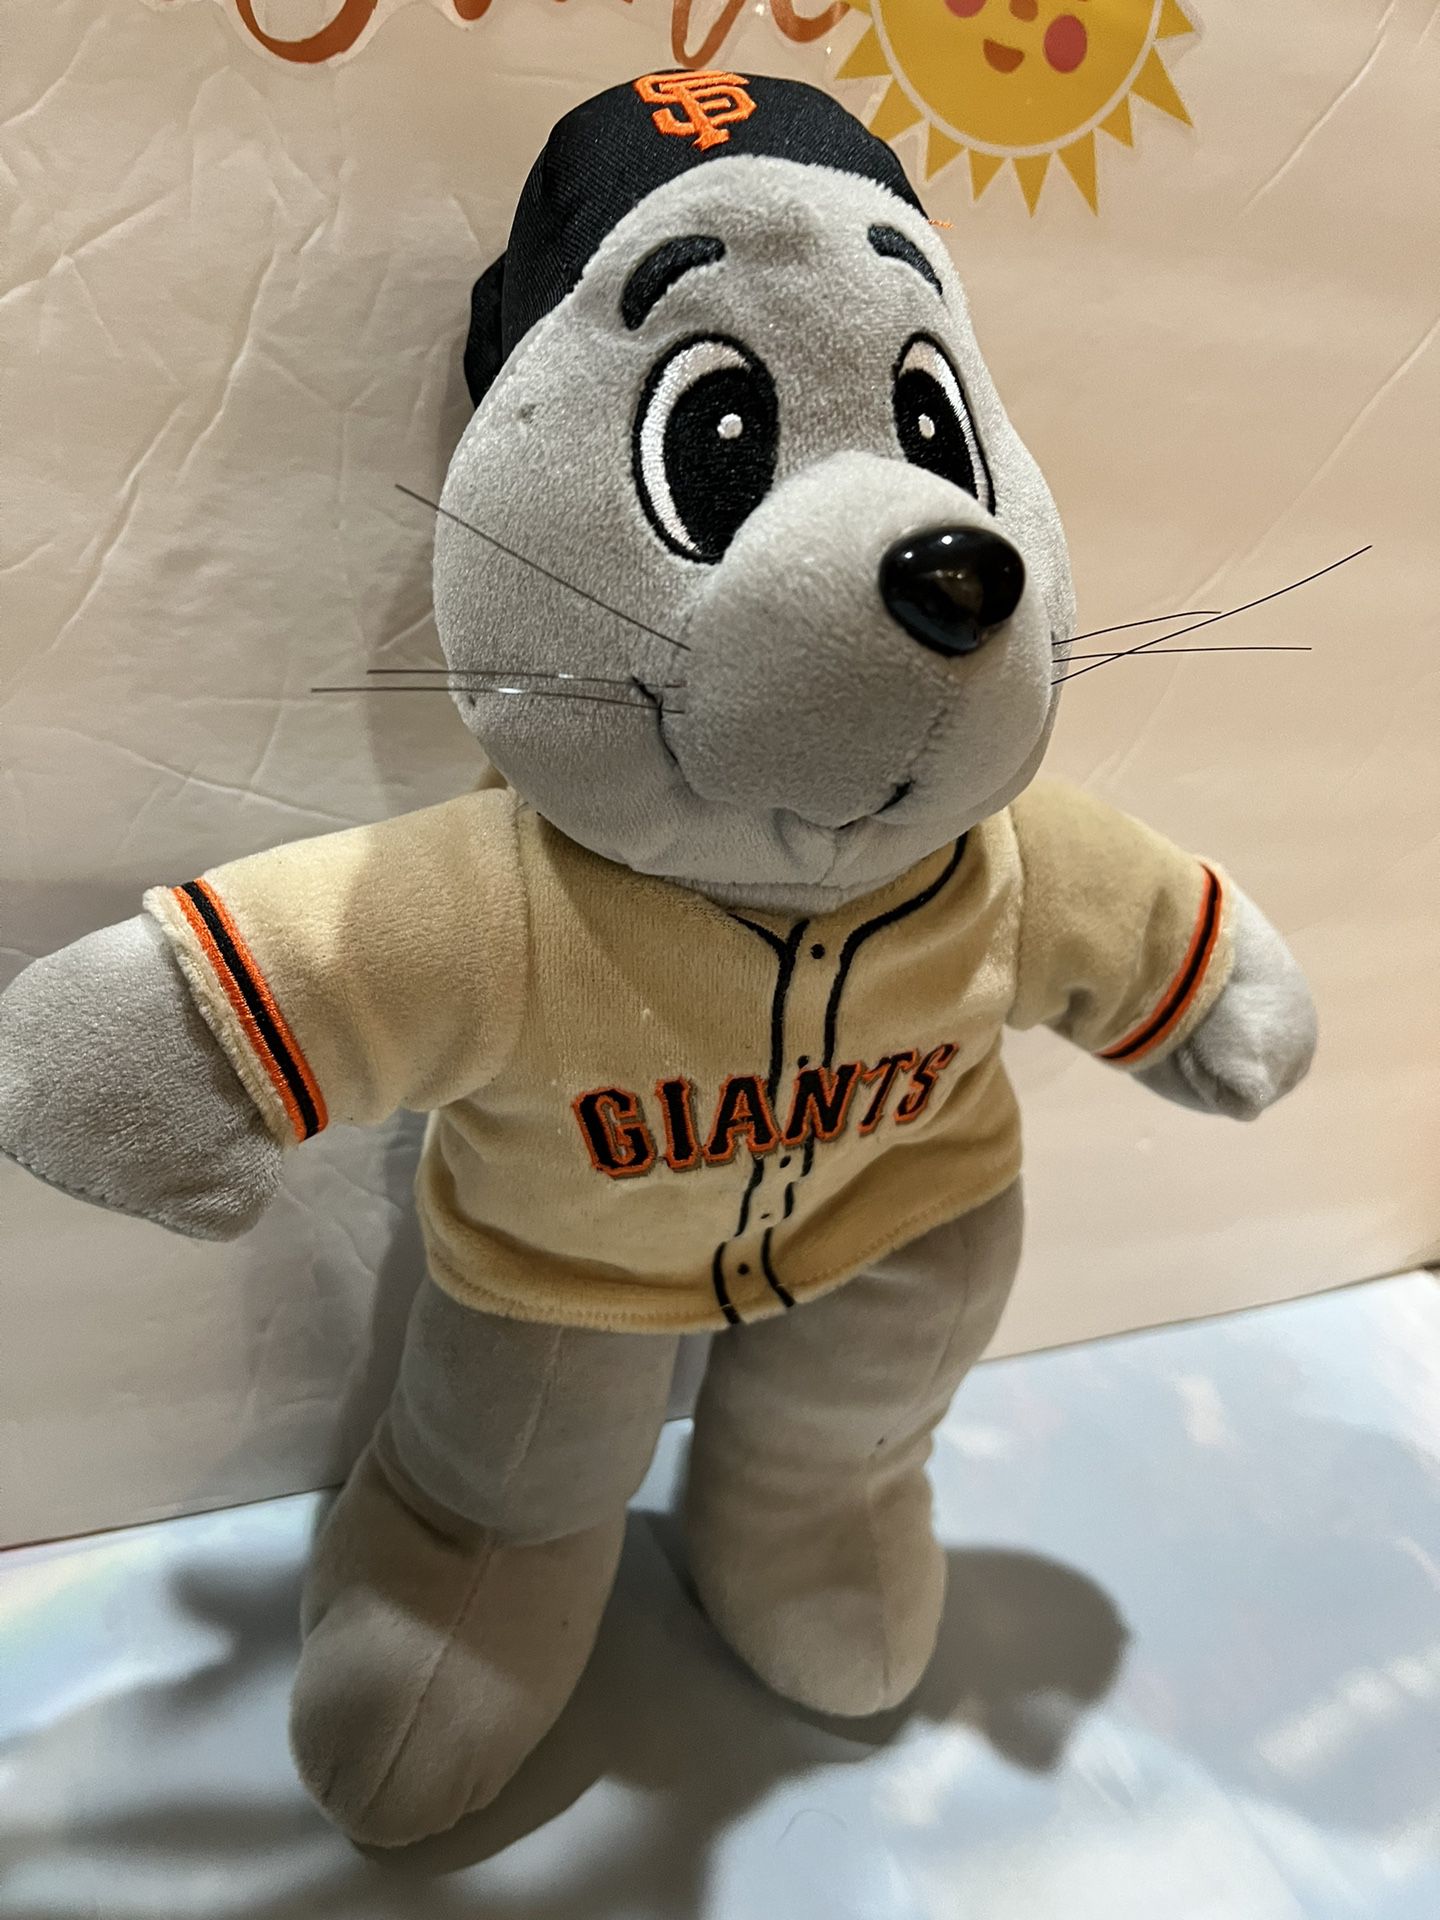 MLB SAN FRANCISCO GIANTS MASCOT LOU SEALS - 15 INCH PLUSH - NEW CINDITION  for Sale in Modesto, CA - OfferUp